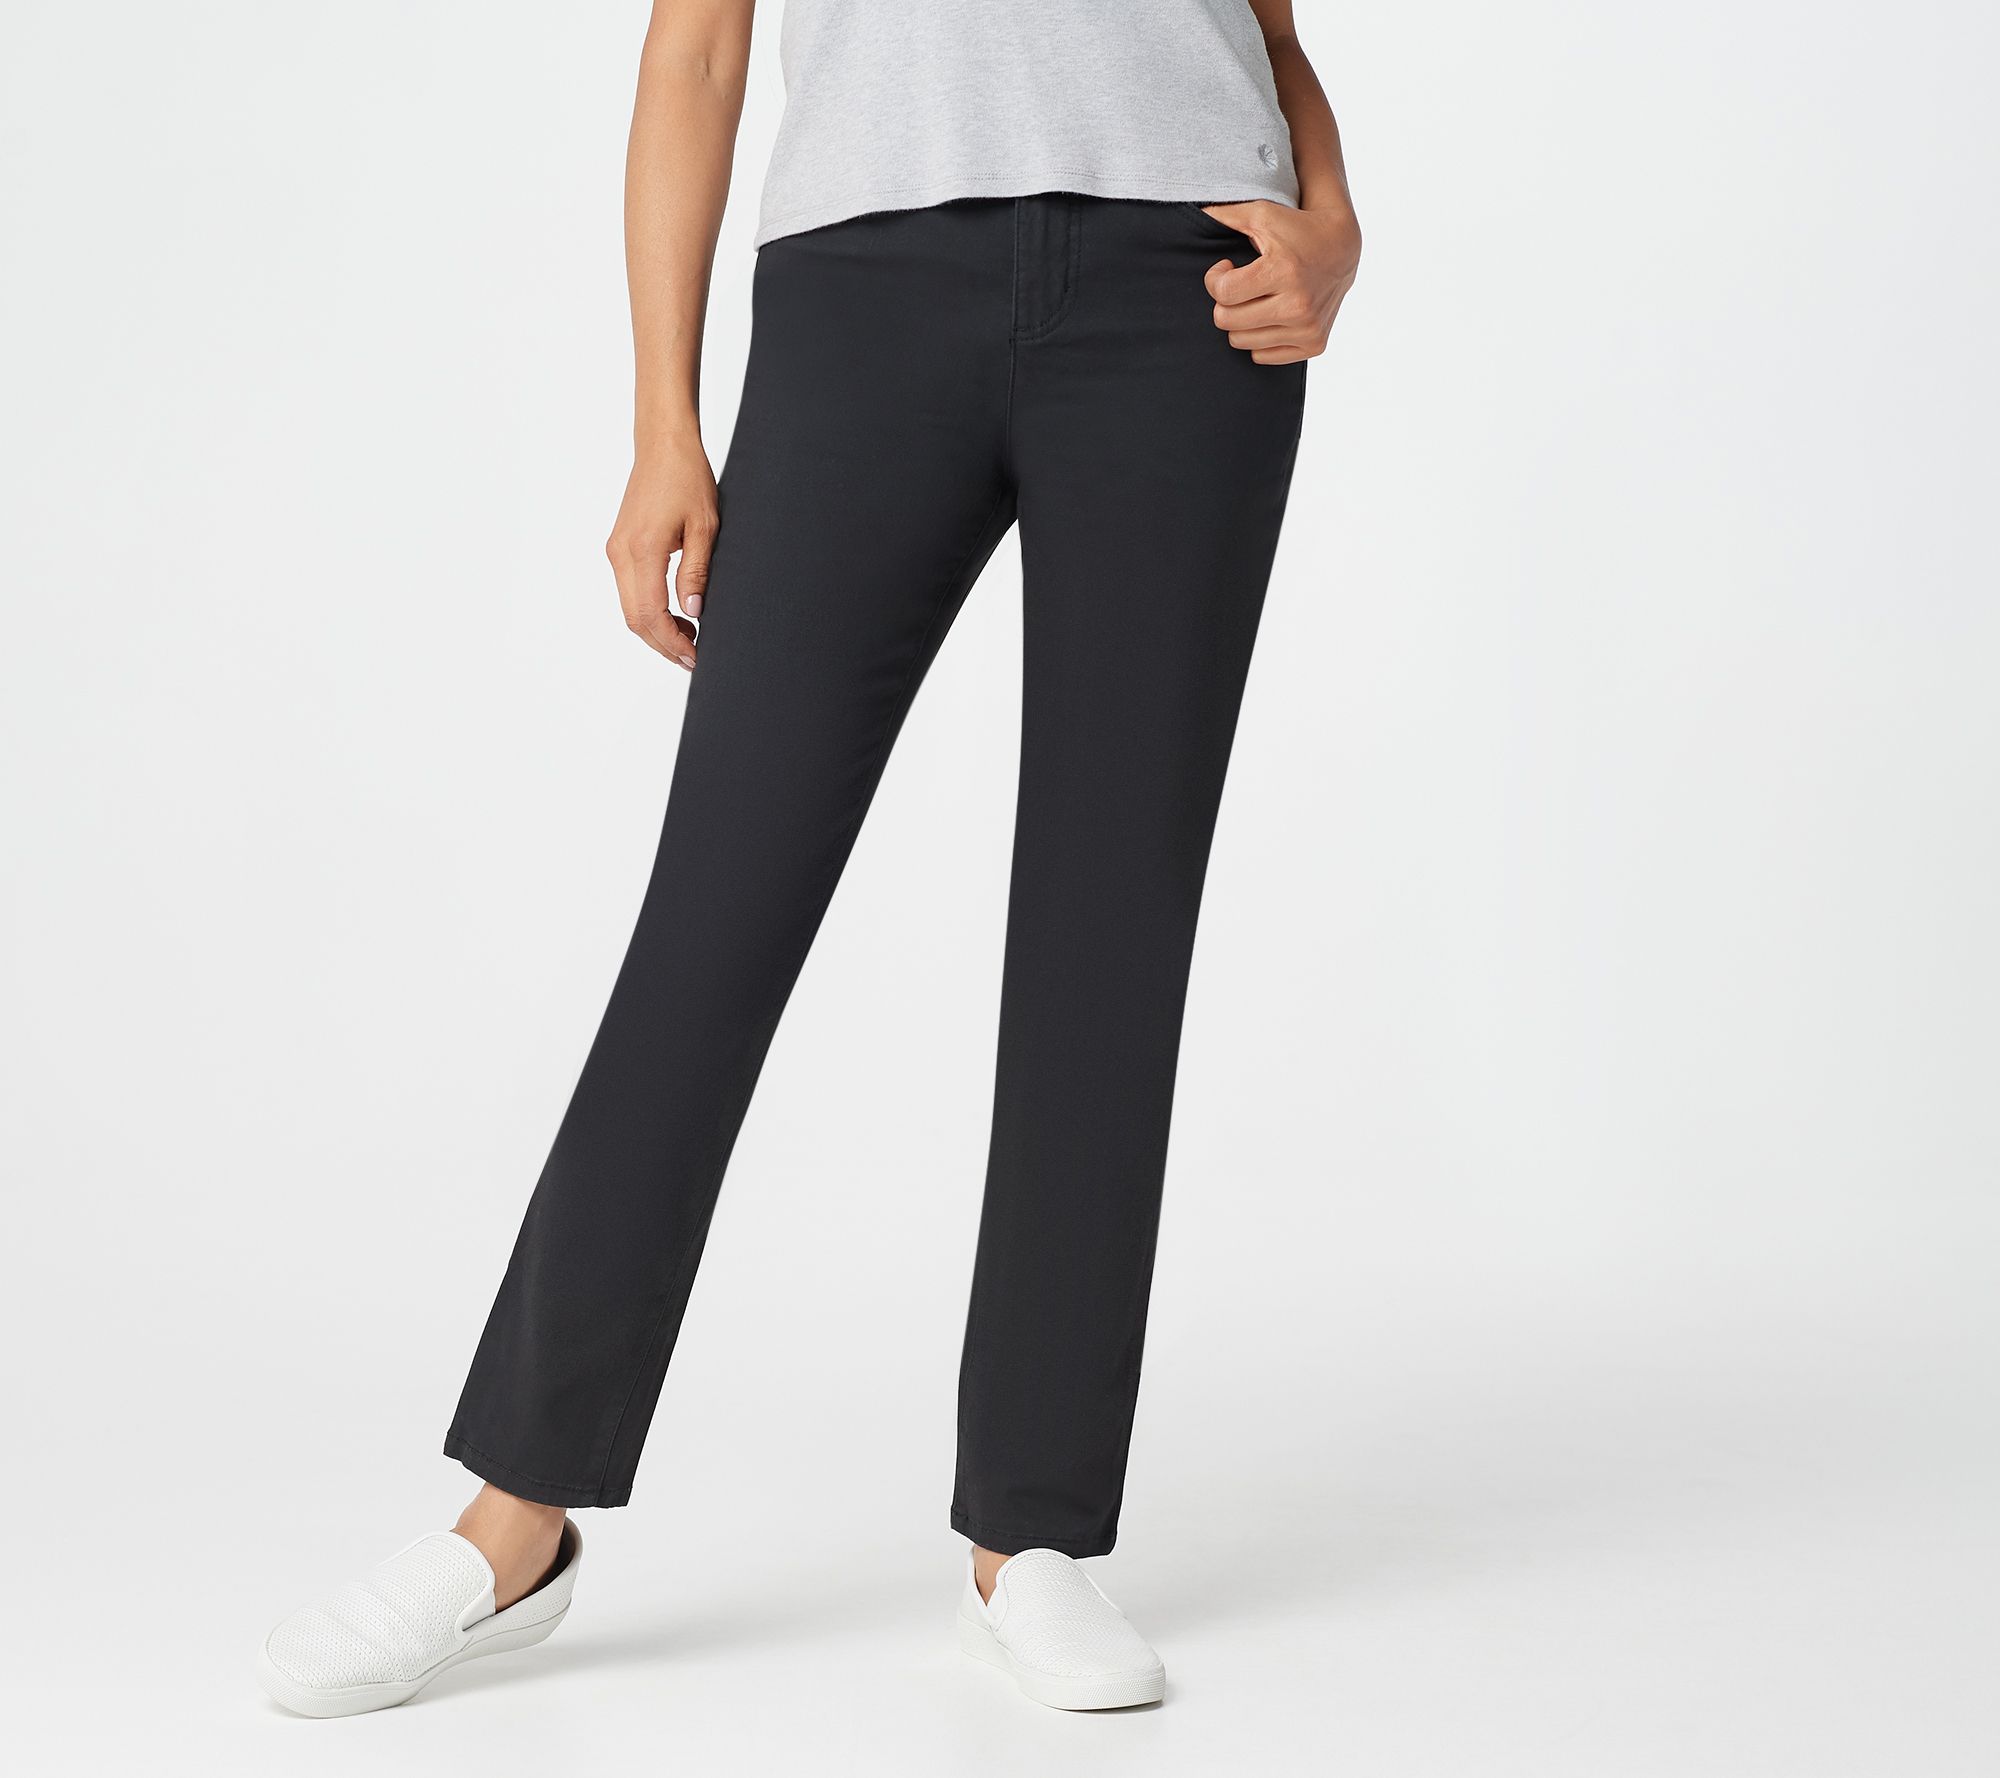 qvc denim and co petite jeans